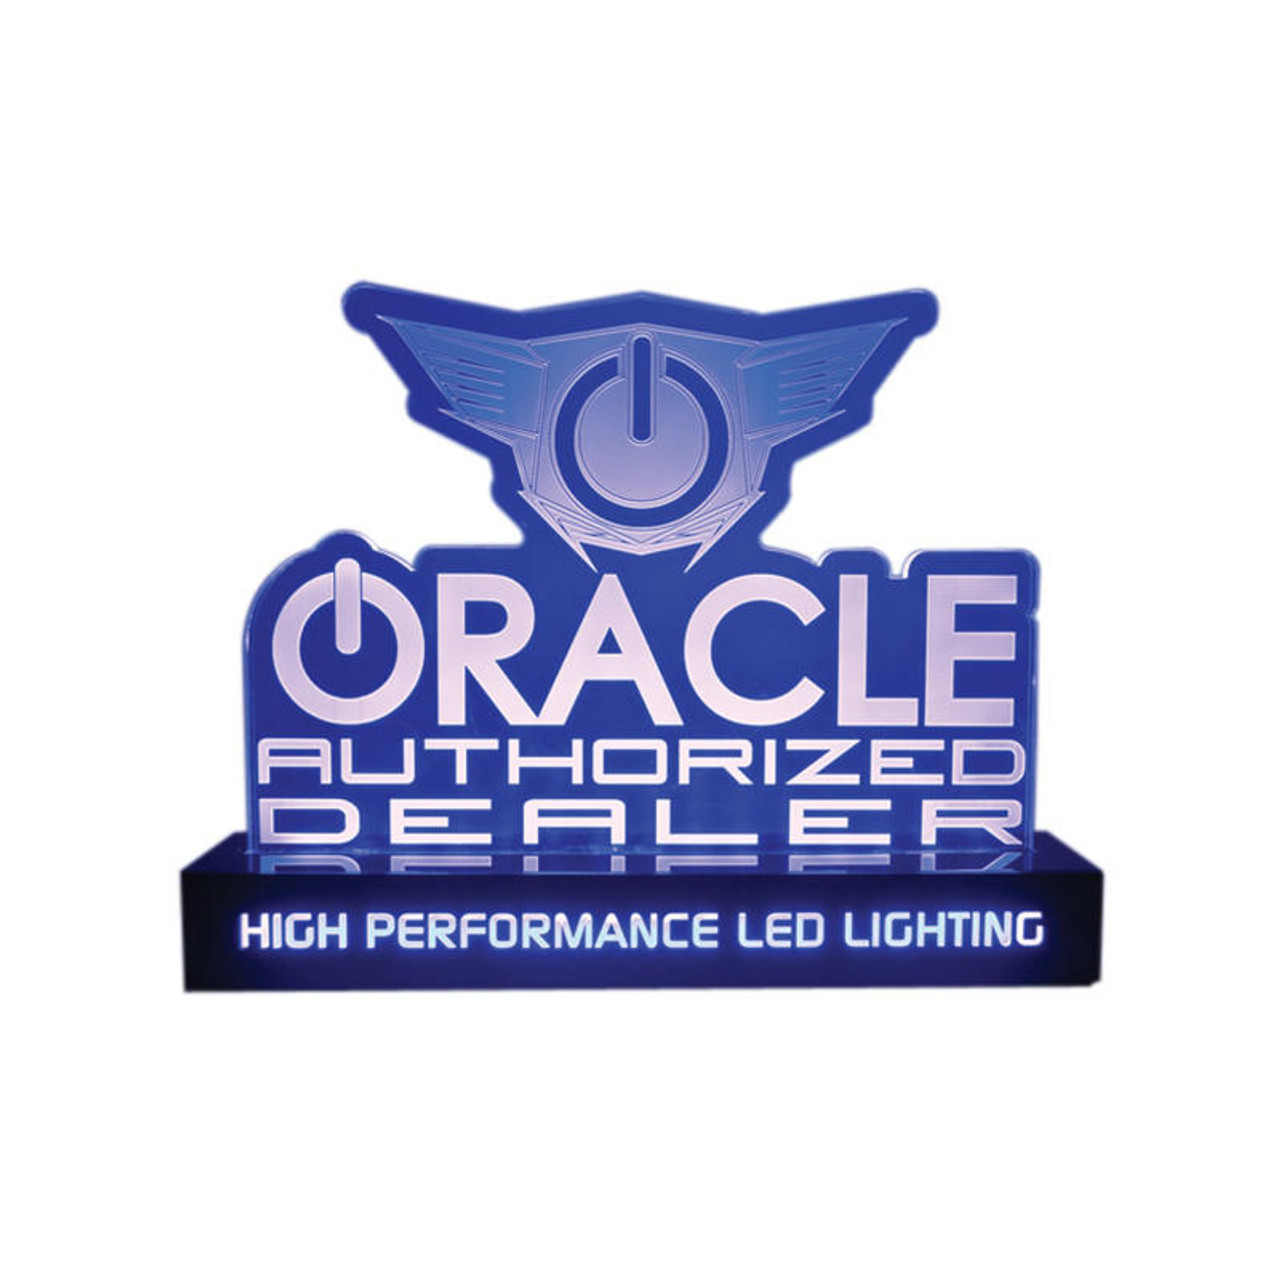 ORACLE Lighting Oracle LED Authorized Dealer Display - Clear - 8051-504 